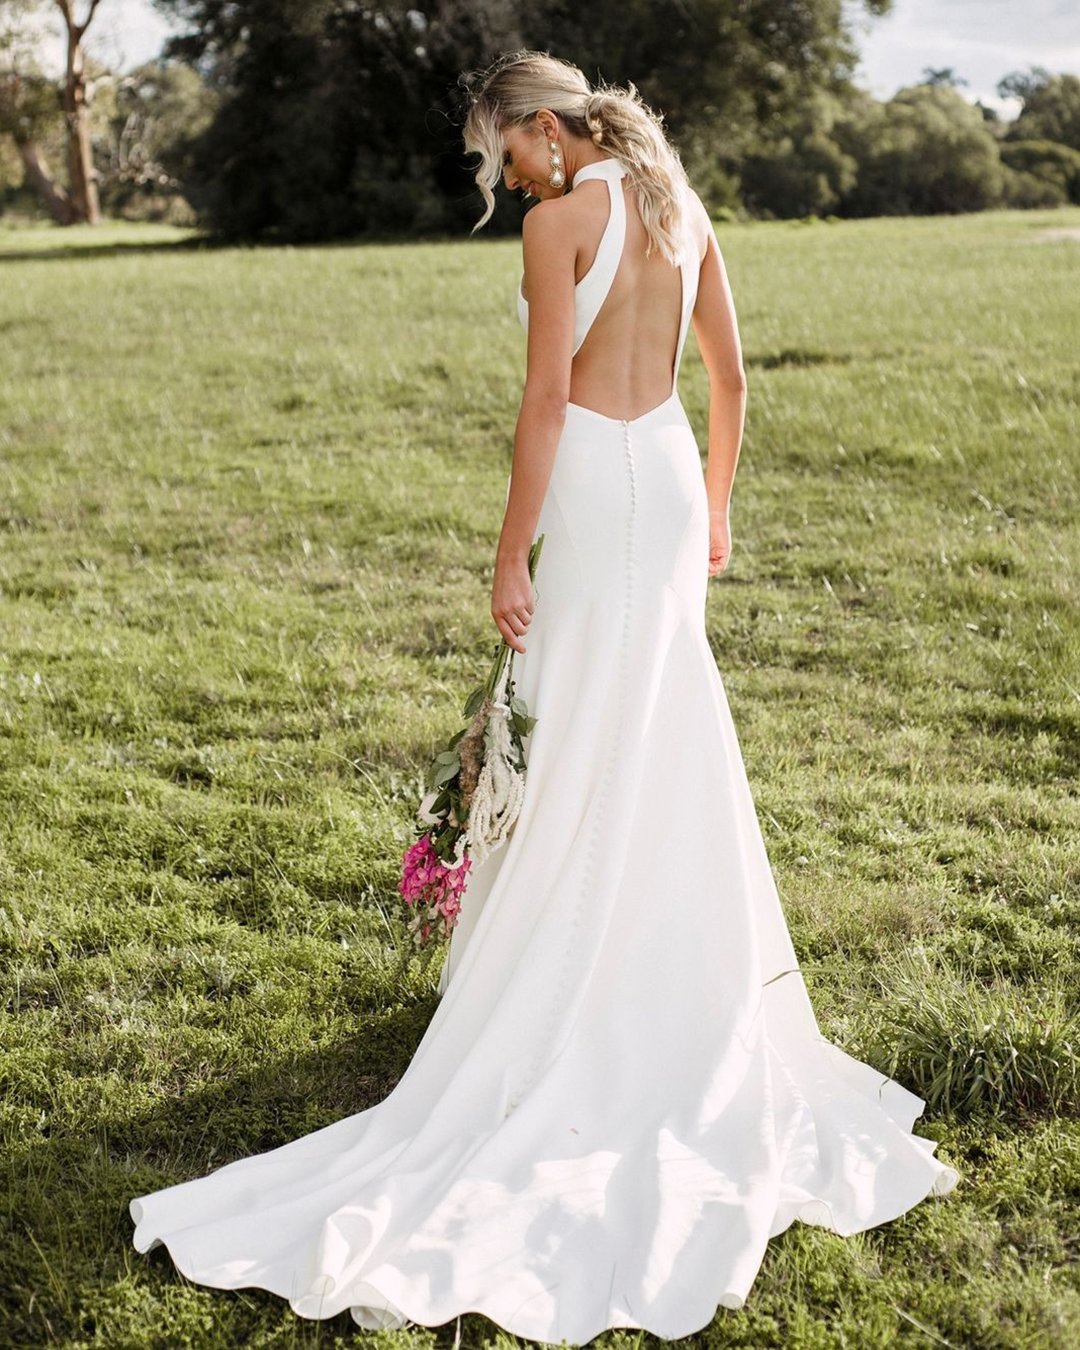 Rustic Wedding Dresses 30 Perfect Styles You'll Love